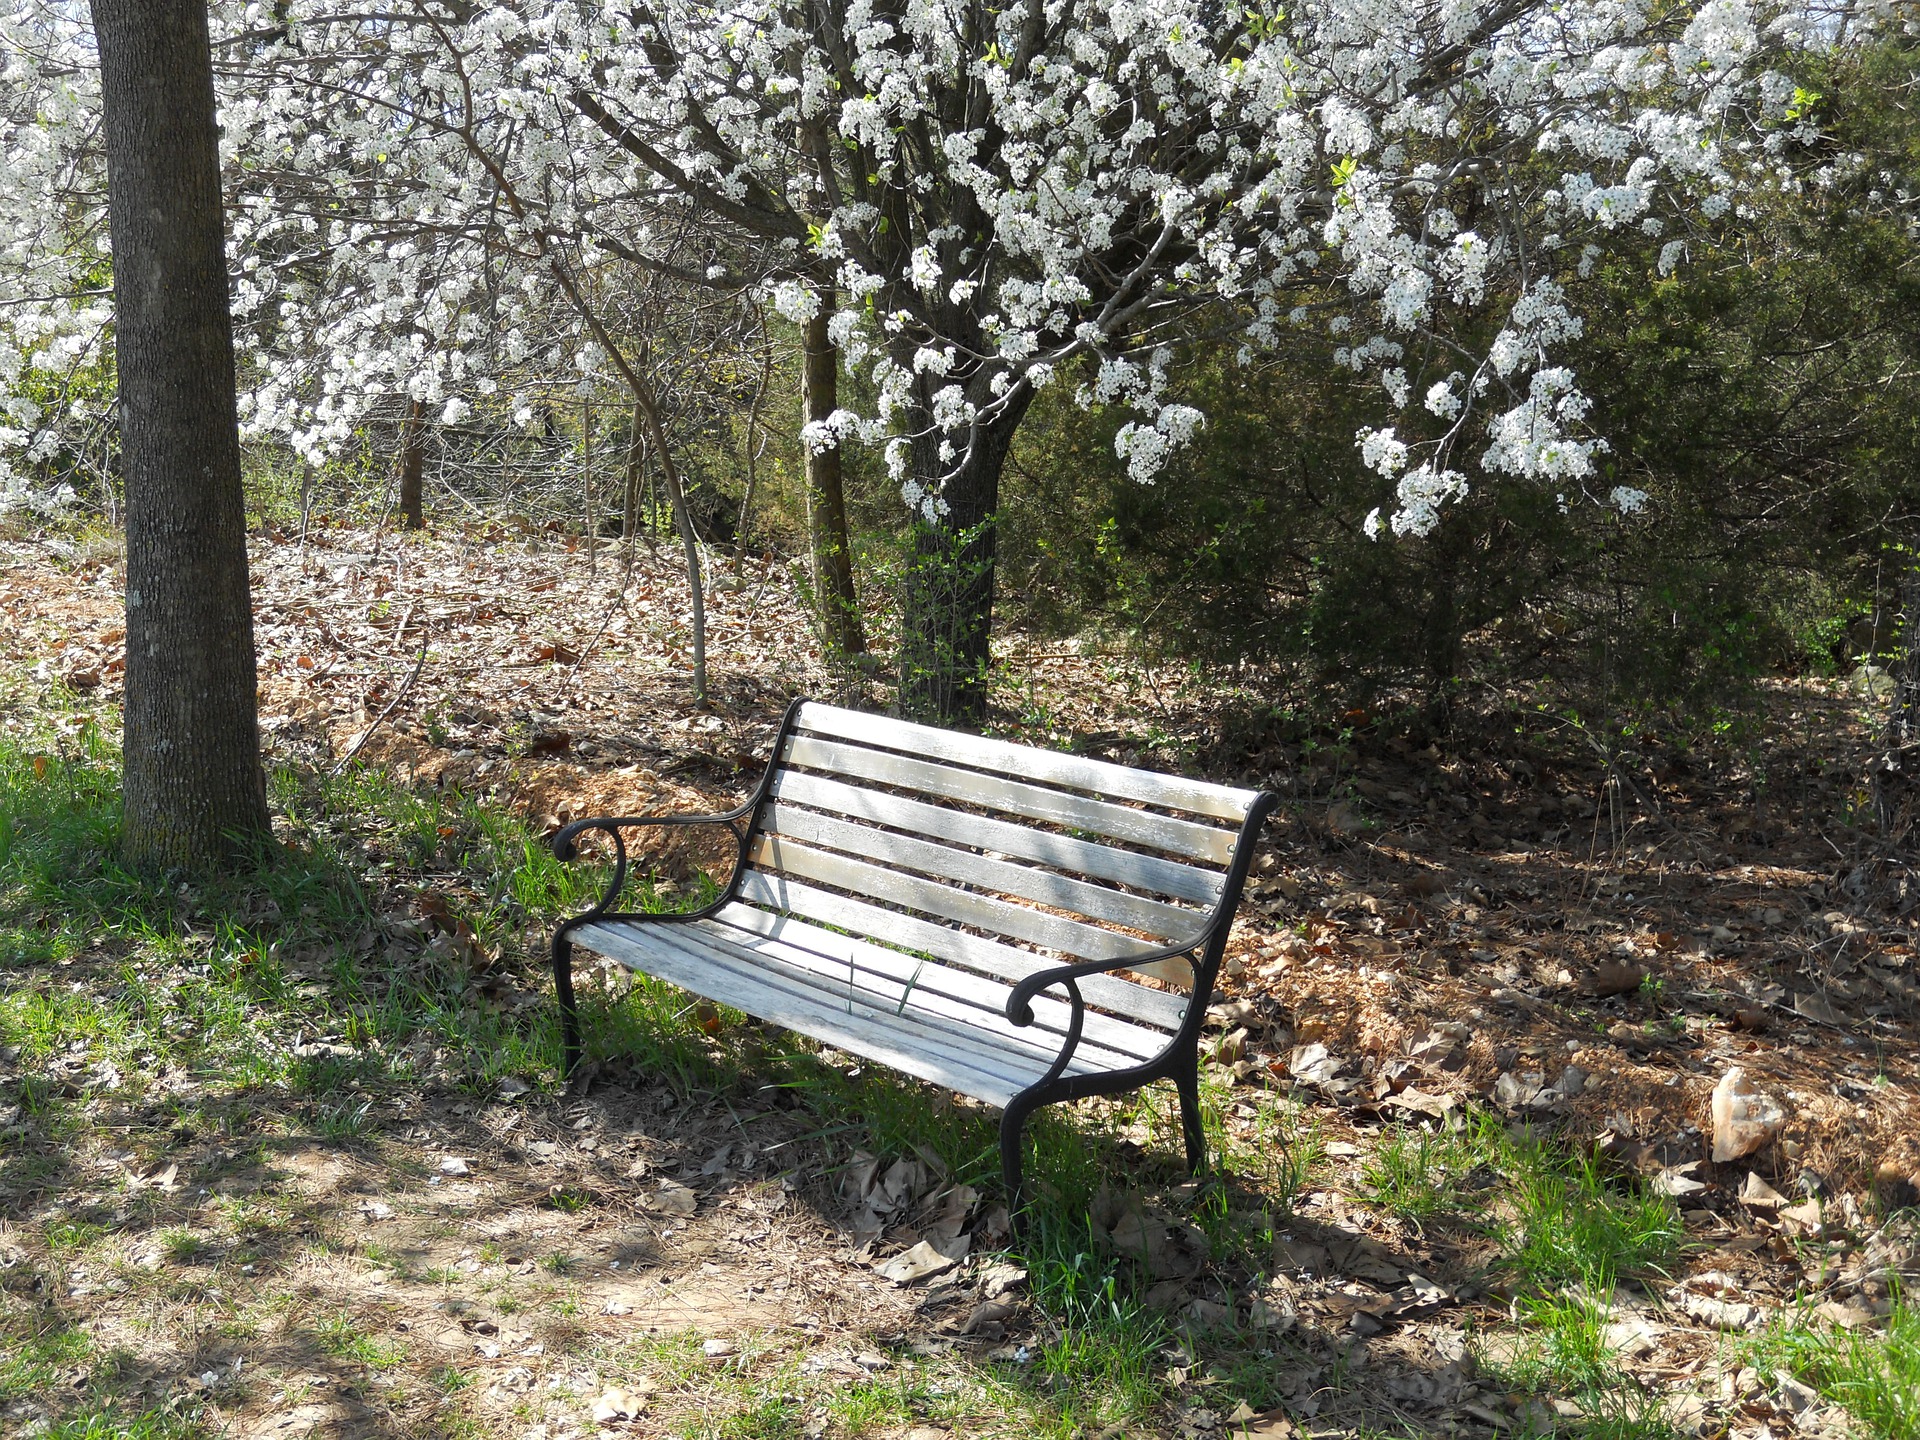 an empty wooden park bench sits under a tree flowering with white blossoms